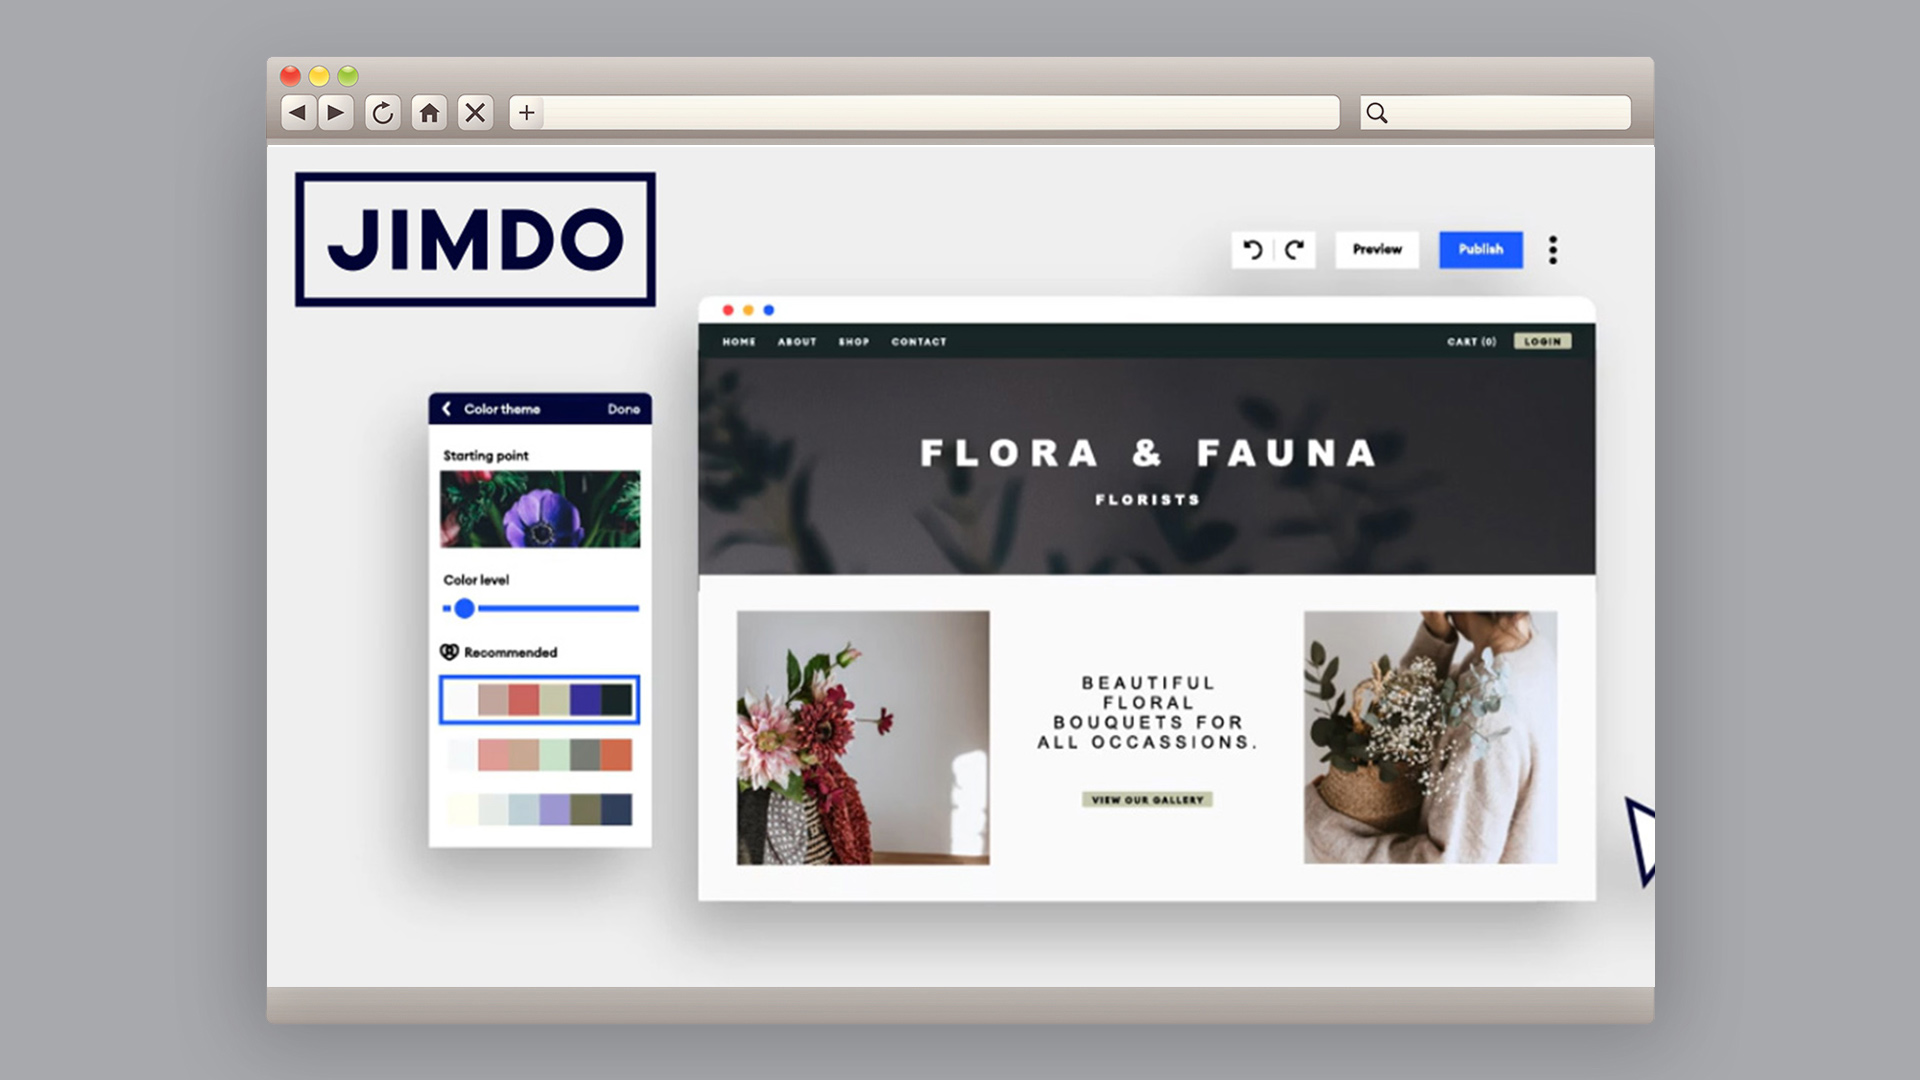 Homepage of Jimdo, one of the best website builders for artists, featuring flower-selling site